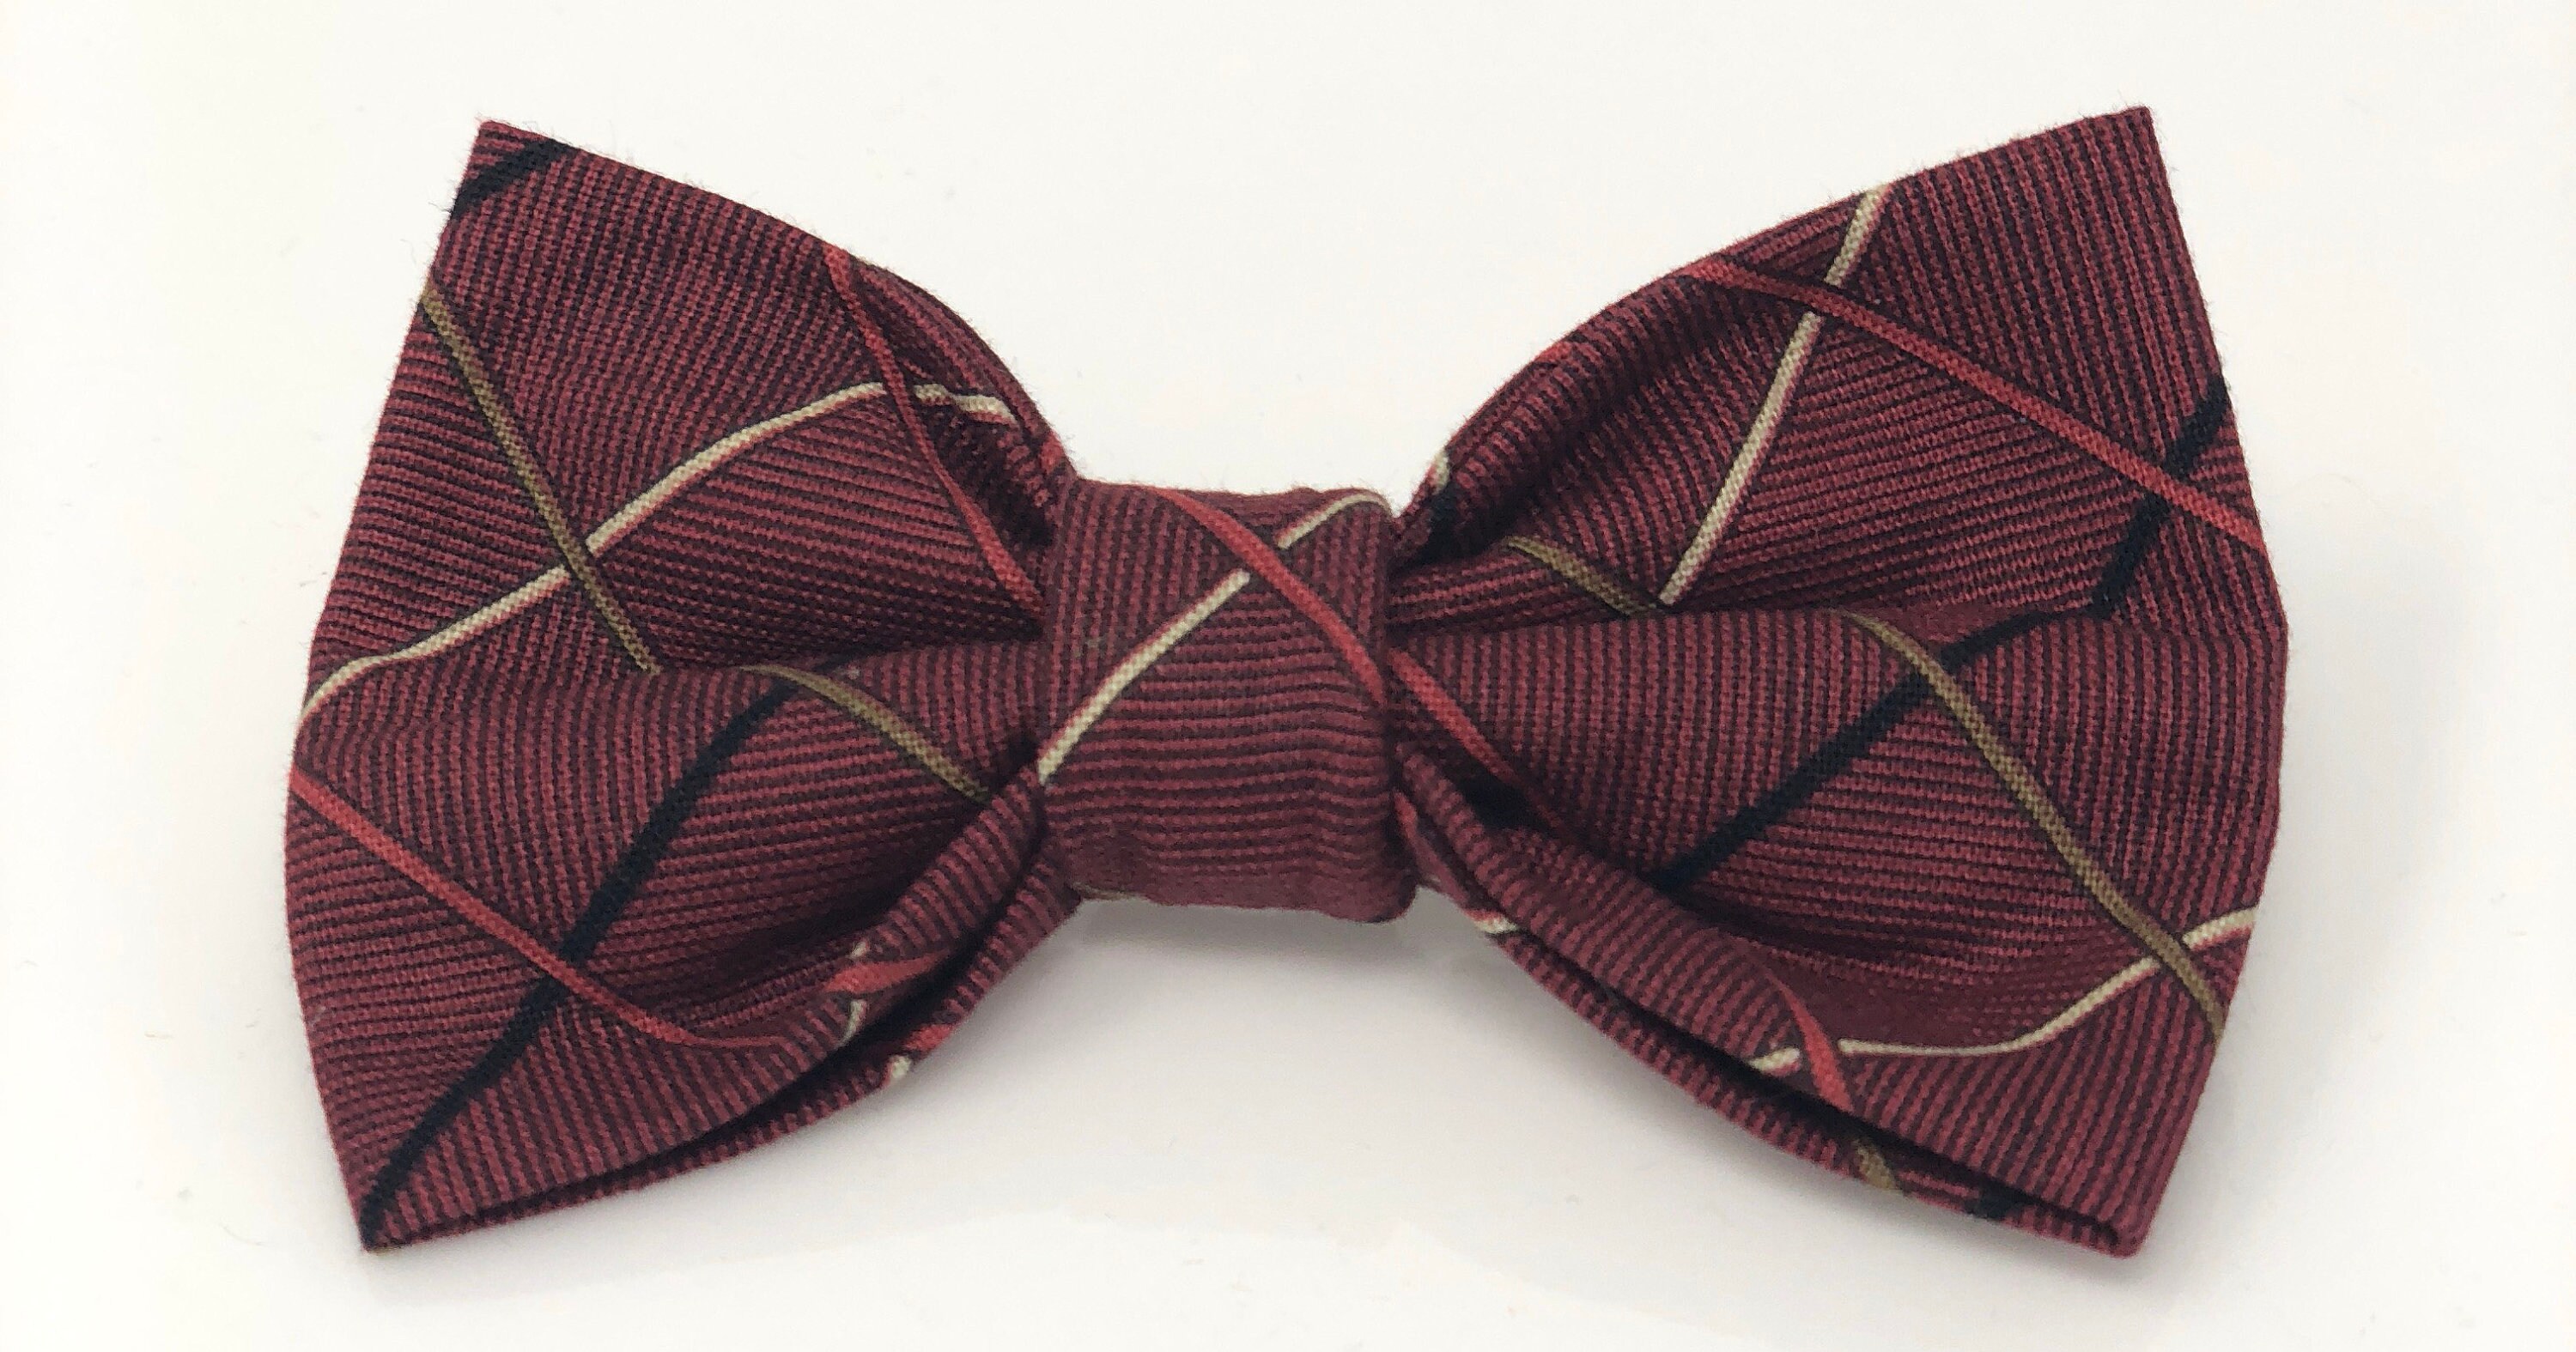 Burgundy With Gold Tan and Black Stripes Bow Ties and | Etsy